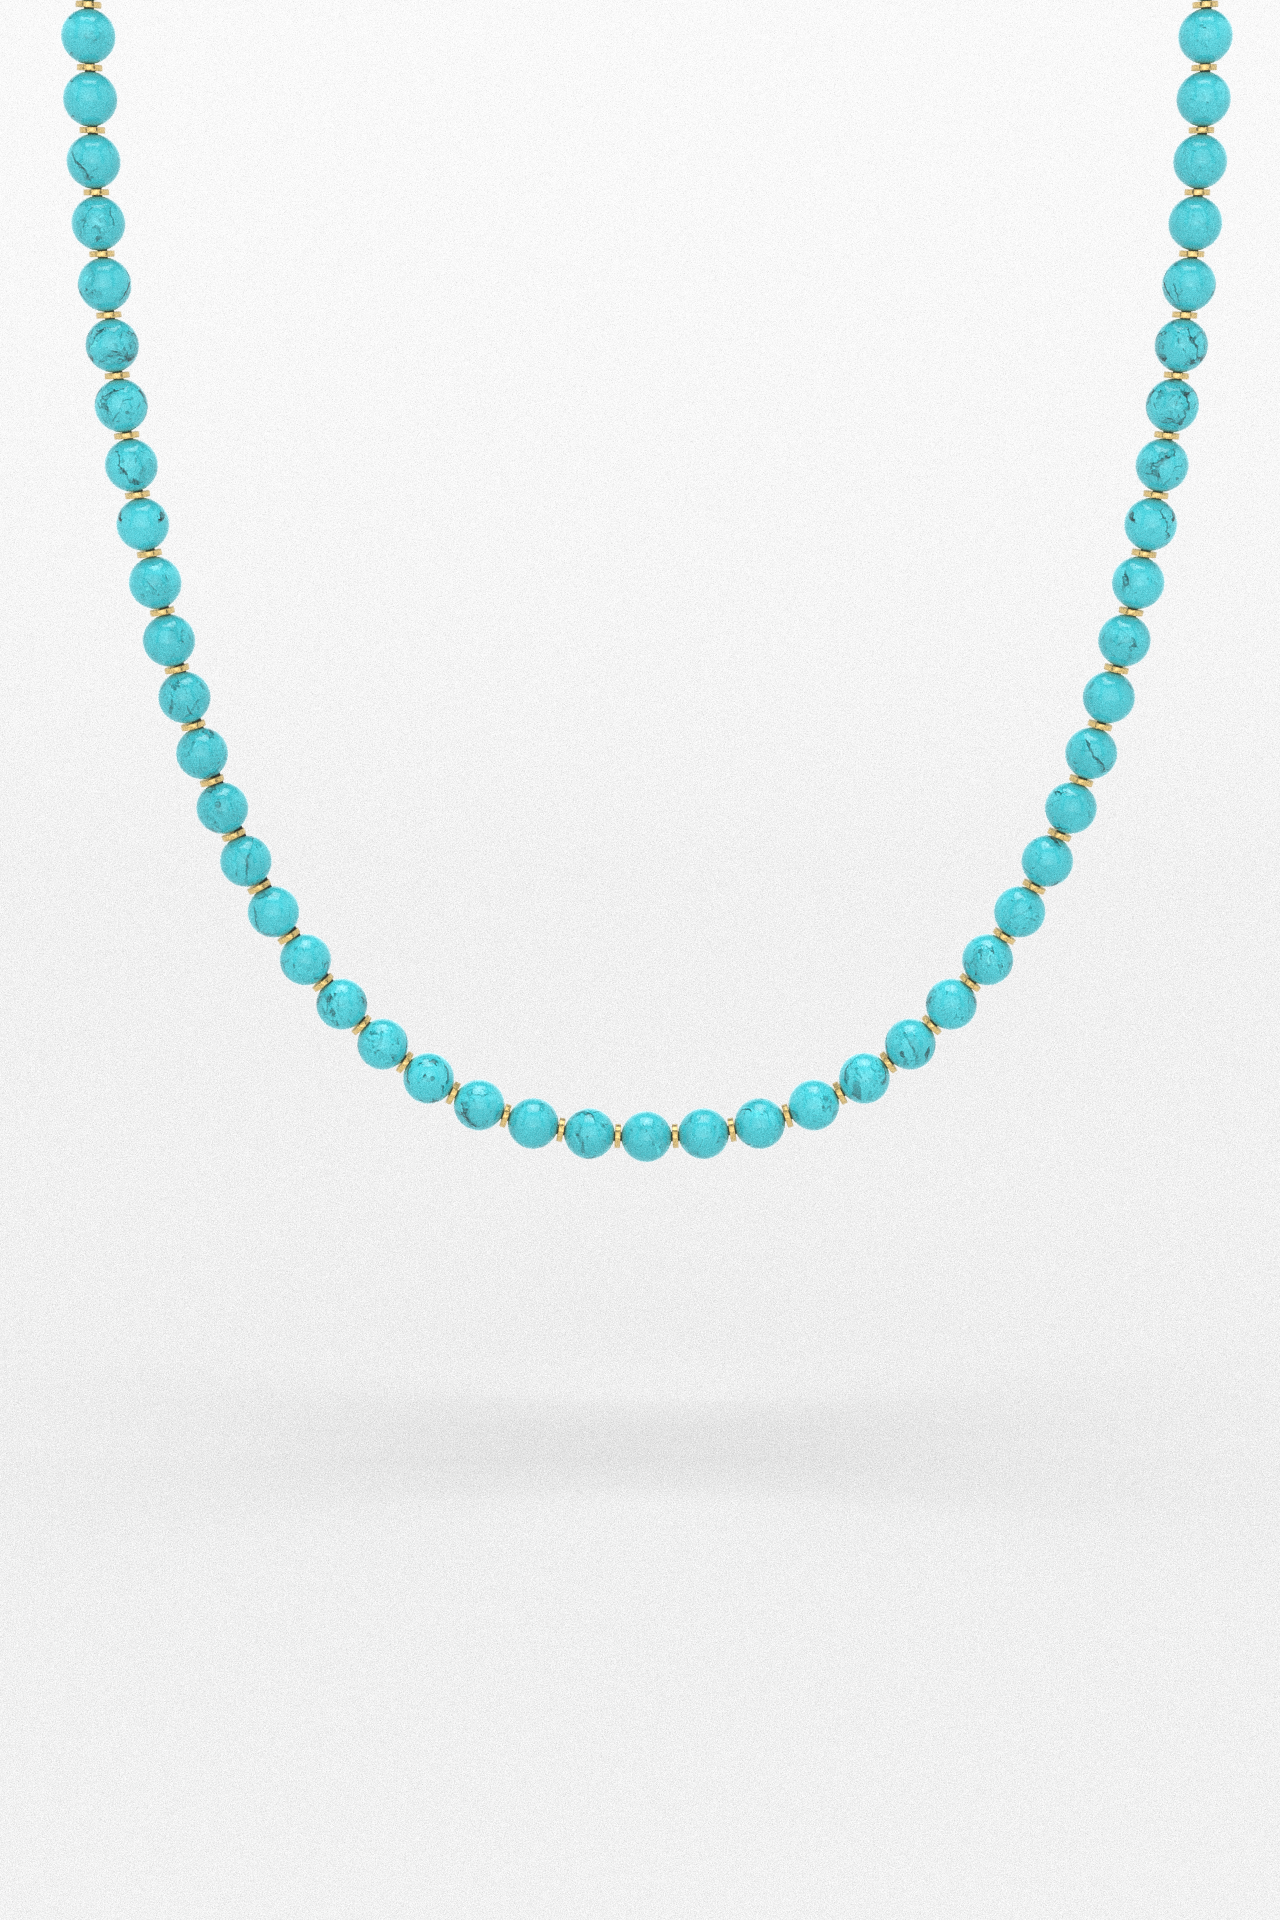 Turquoise Necklace 8mm | Prayer